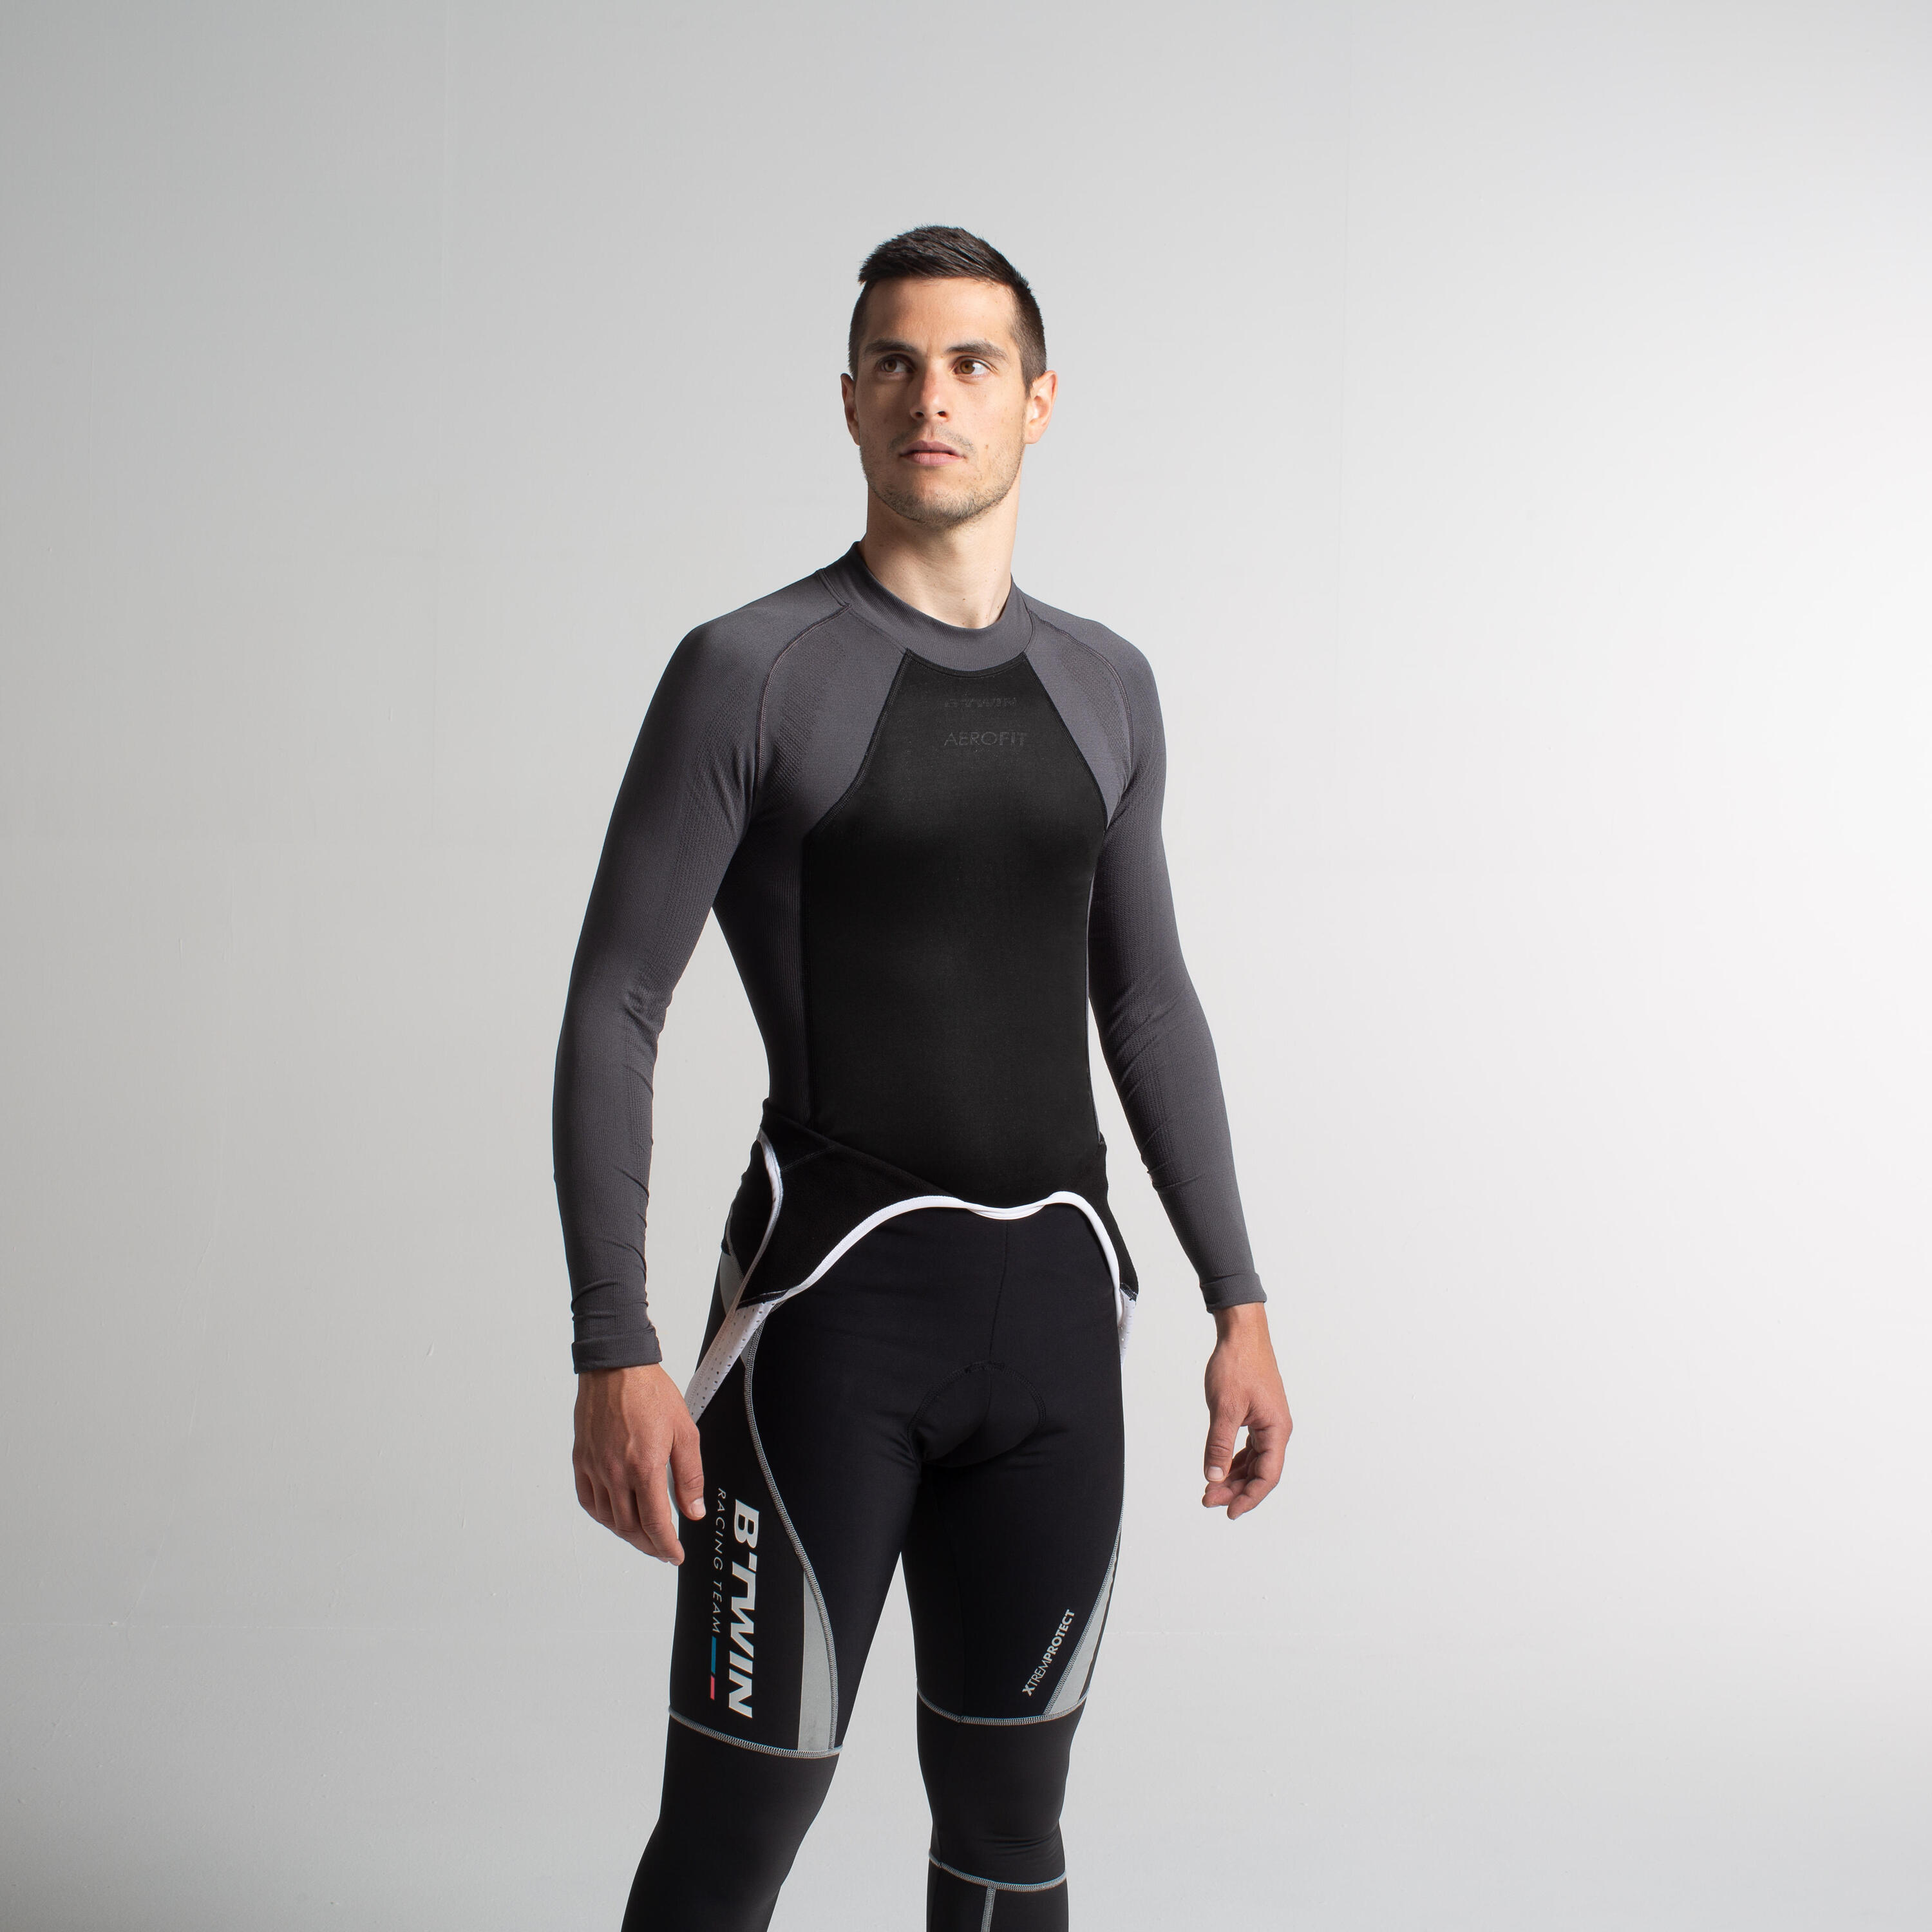 920 Windproof Long-Sleeved Winter Cycling Base Layer 4/5